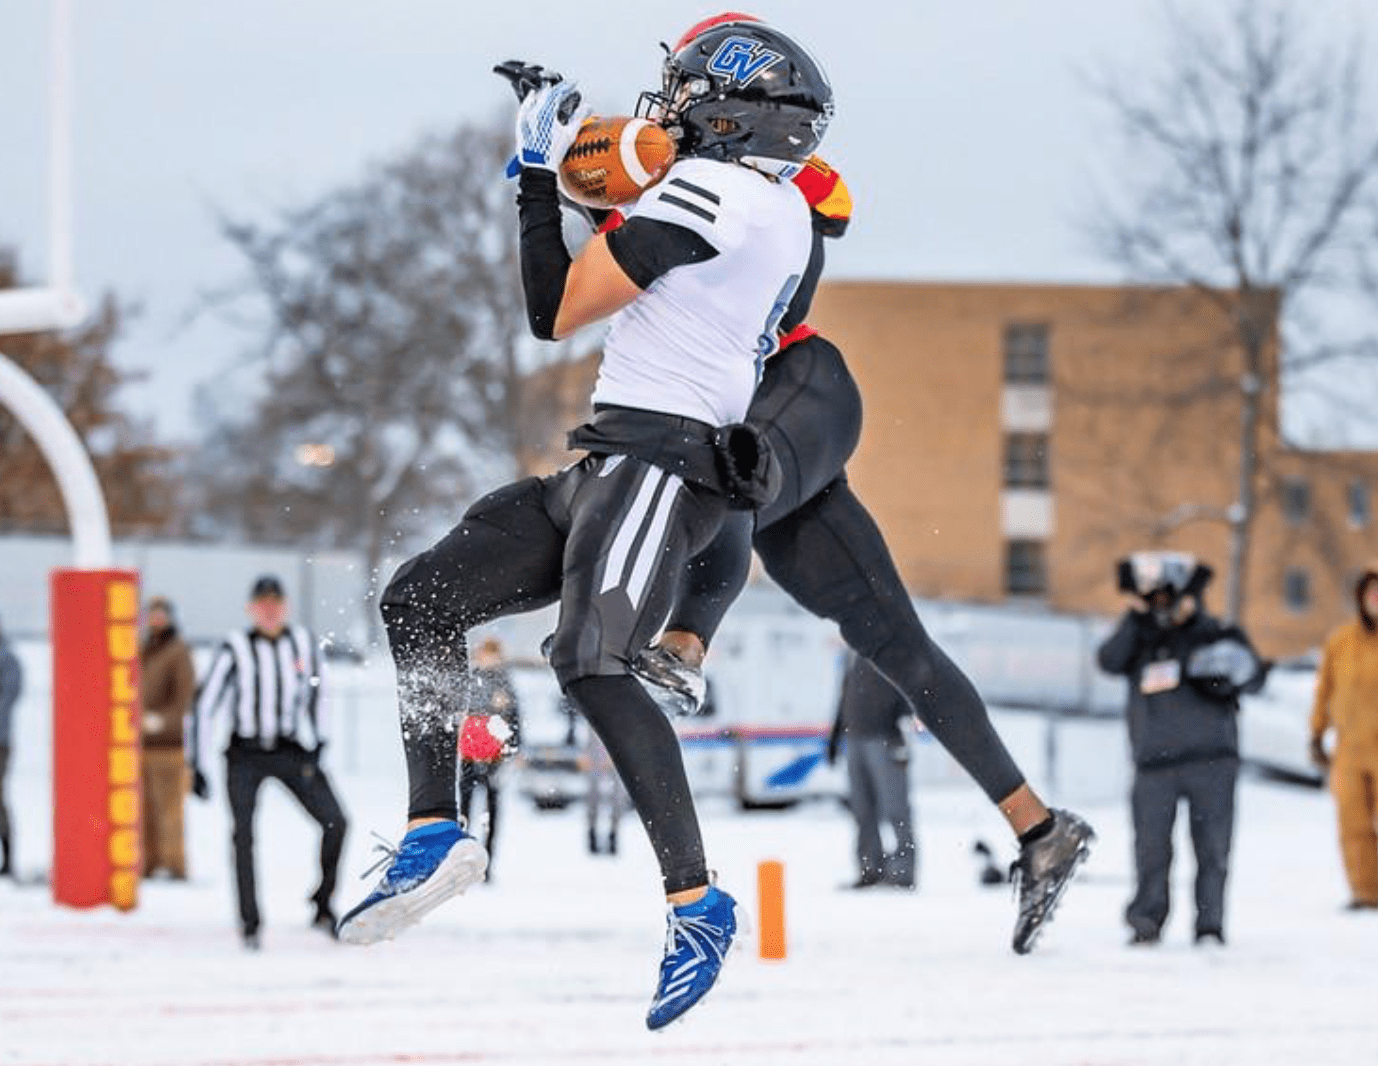 Hunter Rison the standout wide receiver from Grand Valley State University recently sat down with NFL Draft Diamonds writer Justin Berendzen